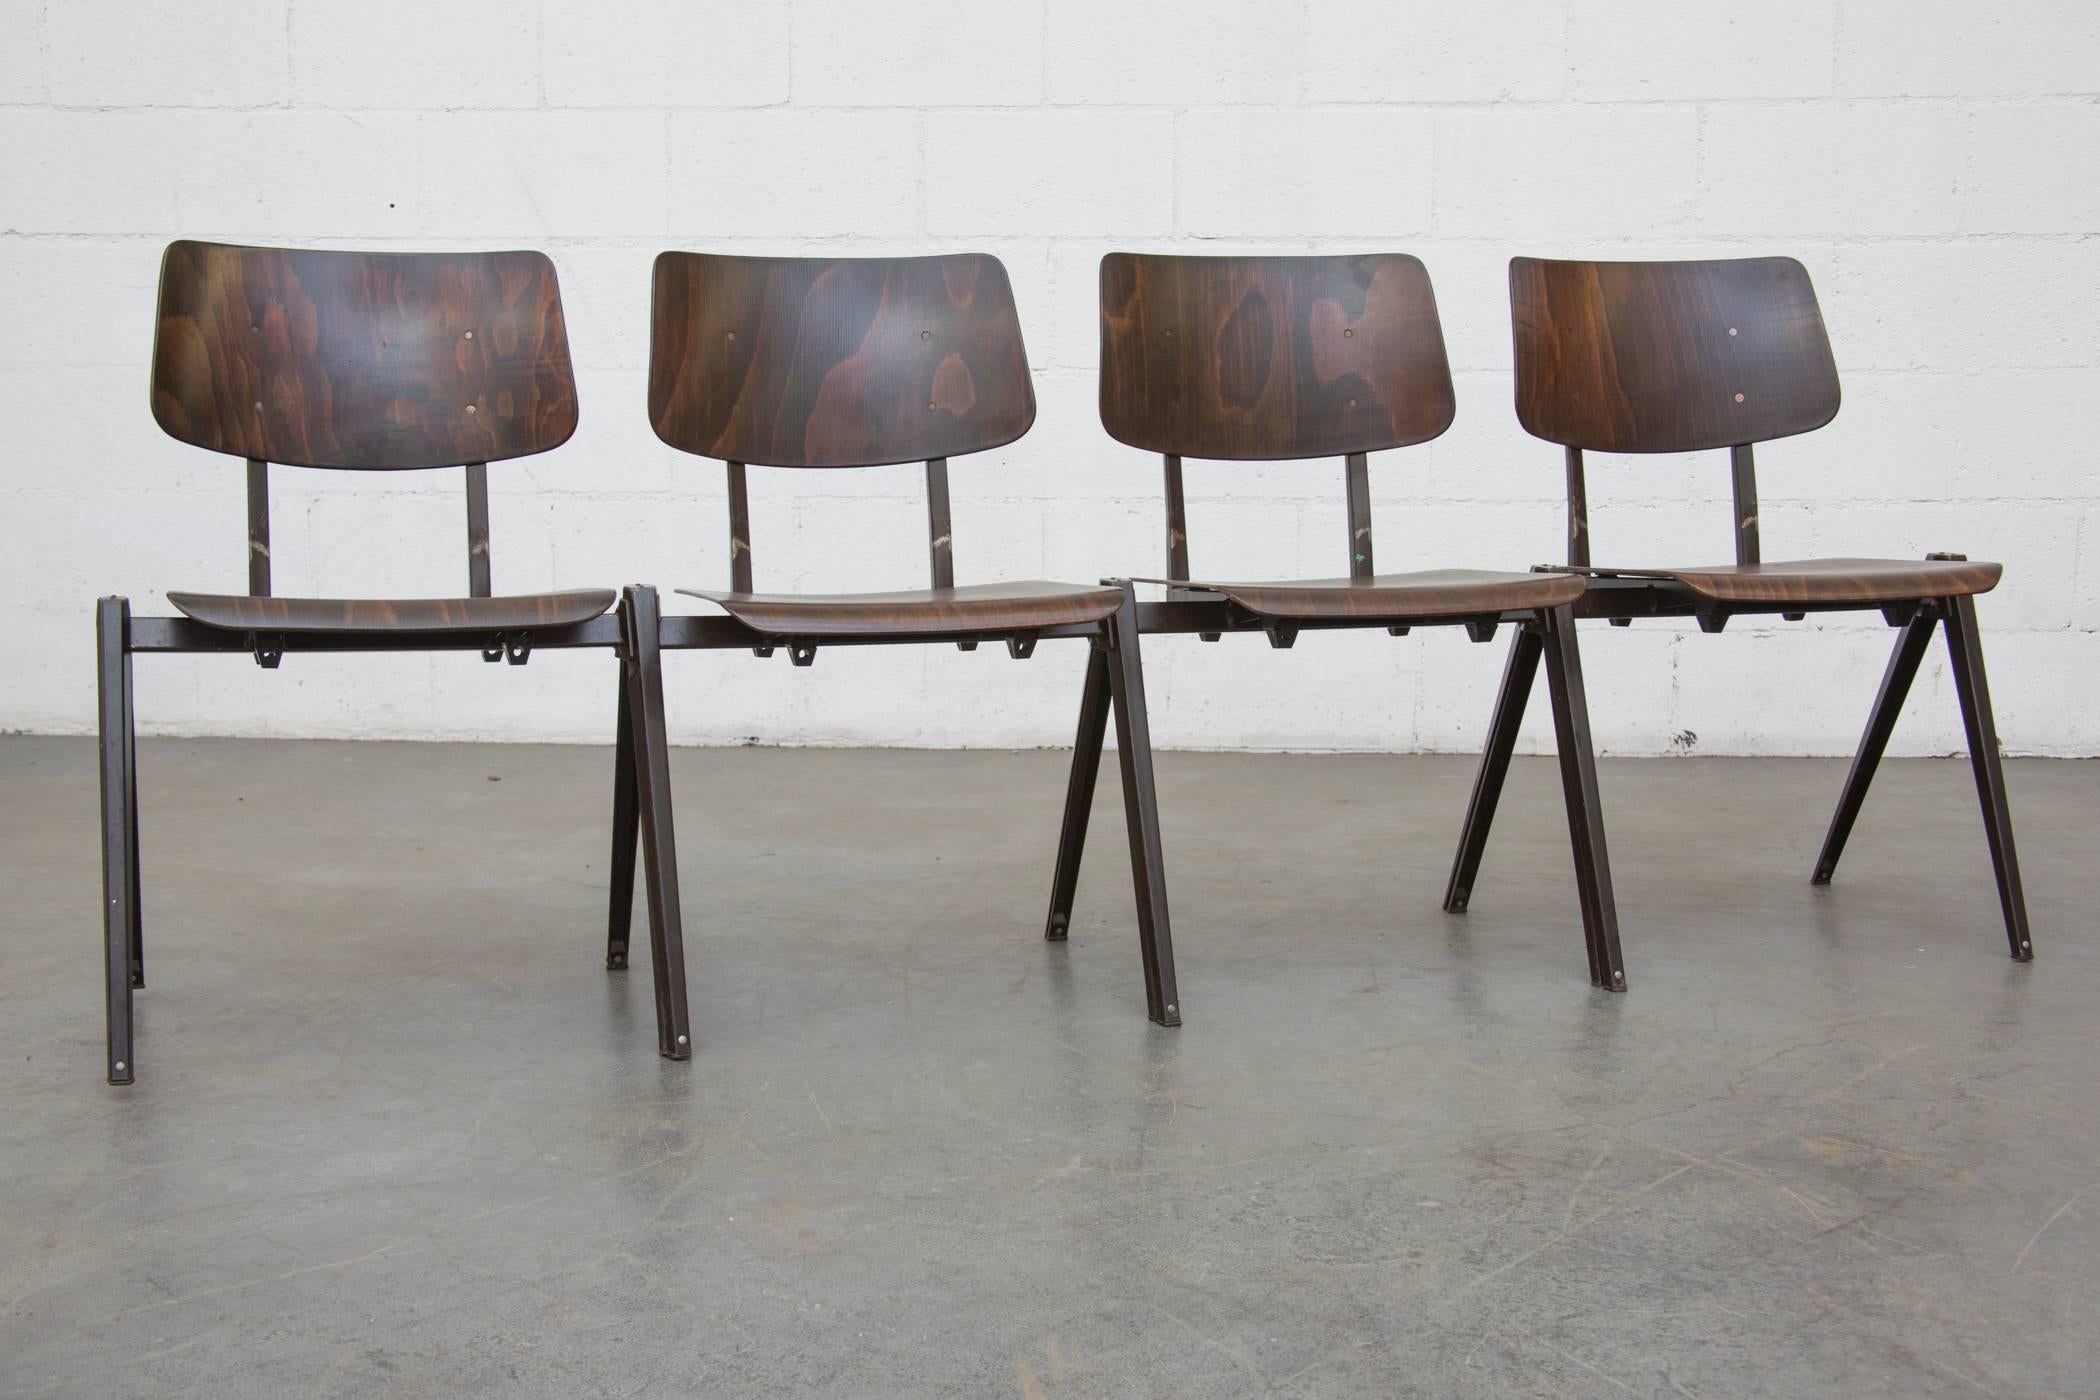 Wenge toned seat and back stacking chairs with brown enameled folded sheet metal prouvé style legs. Legs stack over each other to create a row. Slight variations in color and grain. Original condition with visible wear to enamel on frame. Set price.